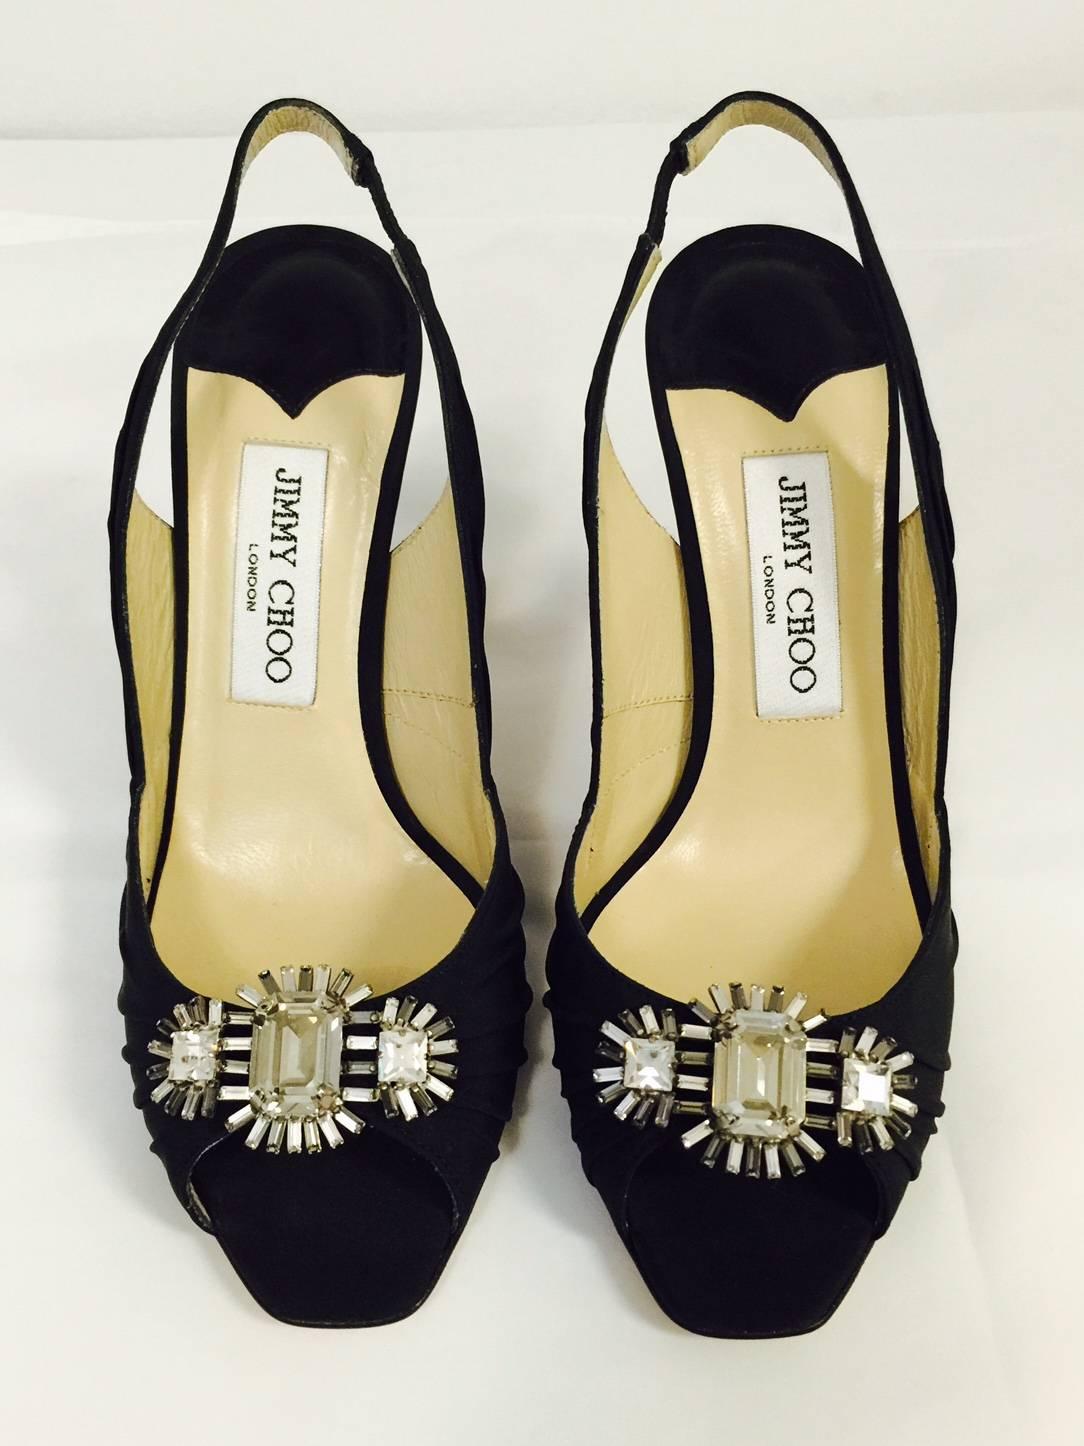 Trip the light fantastic in these Jimmy Choo Evening Sling Backs!  Crafted from 